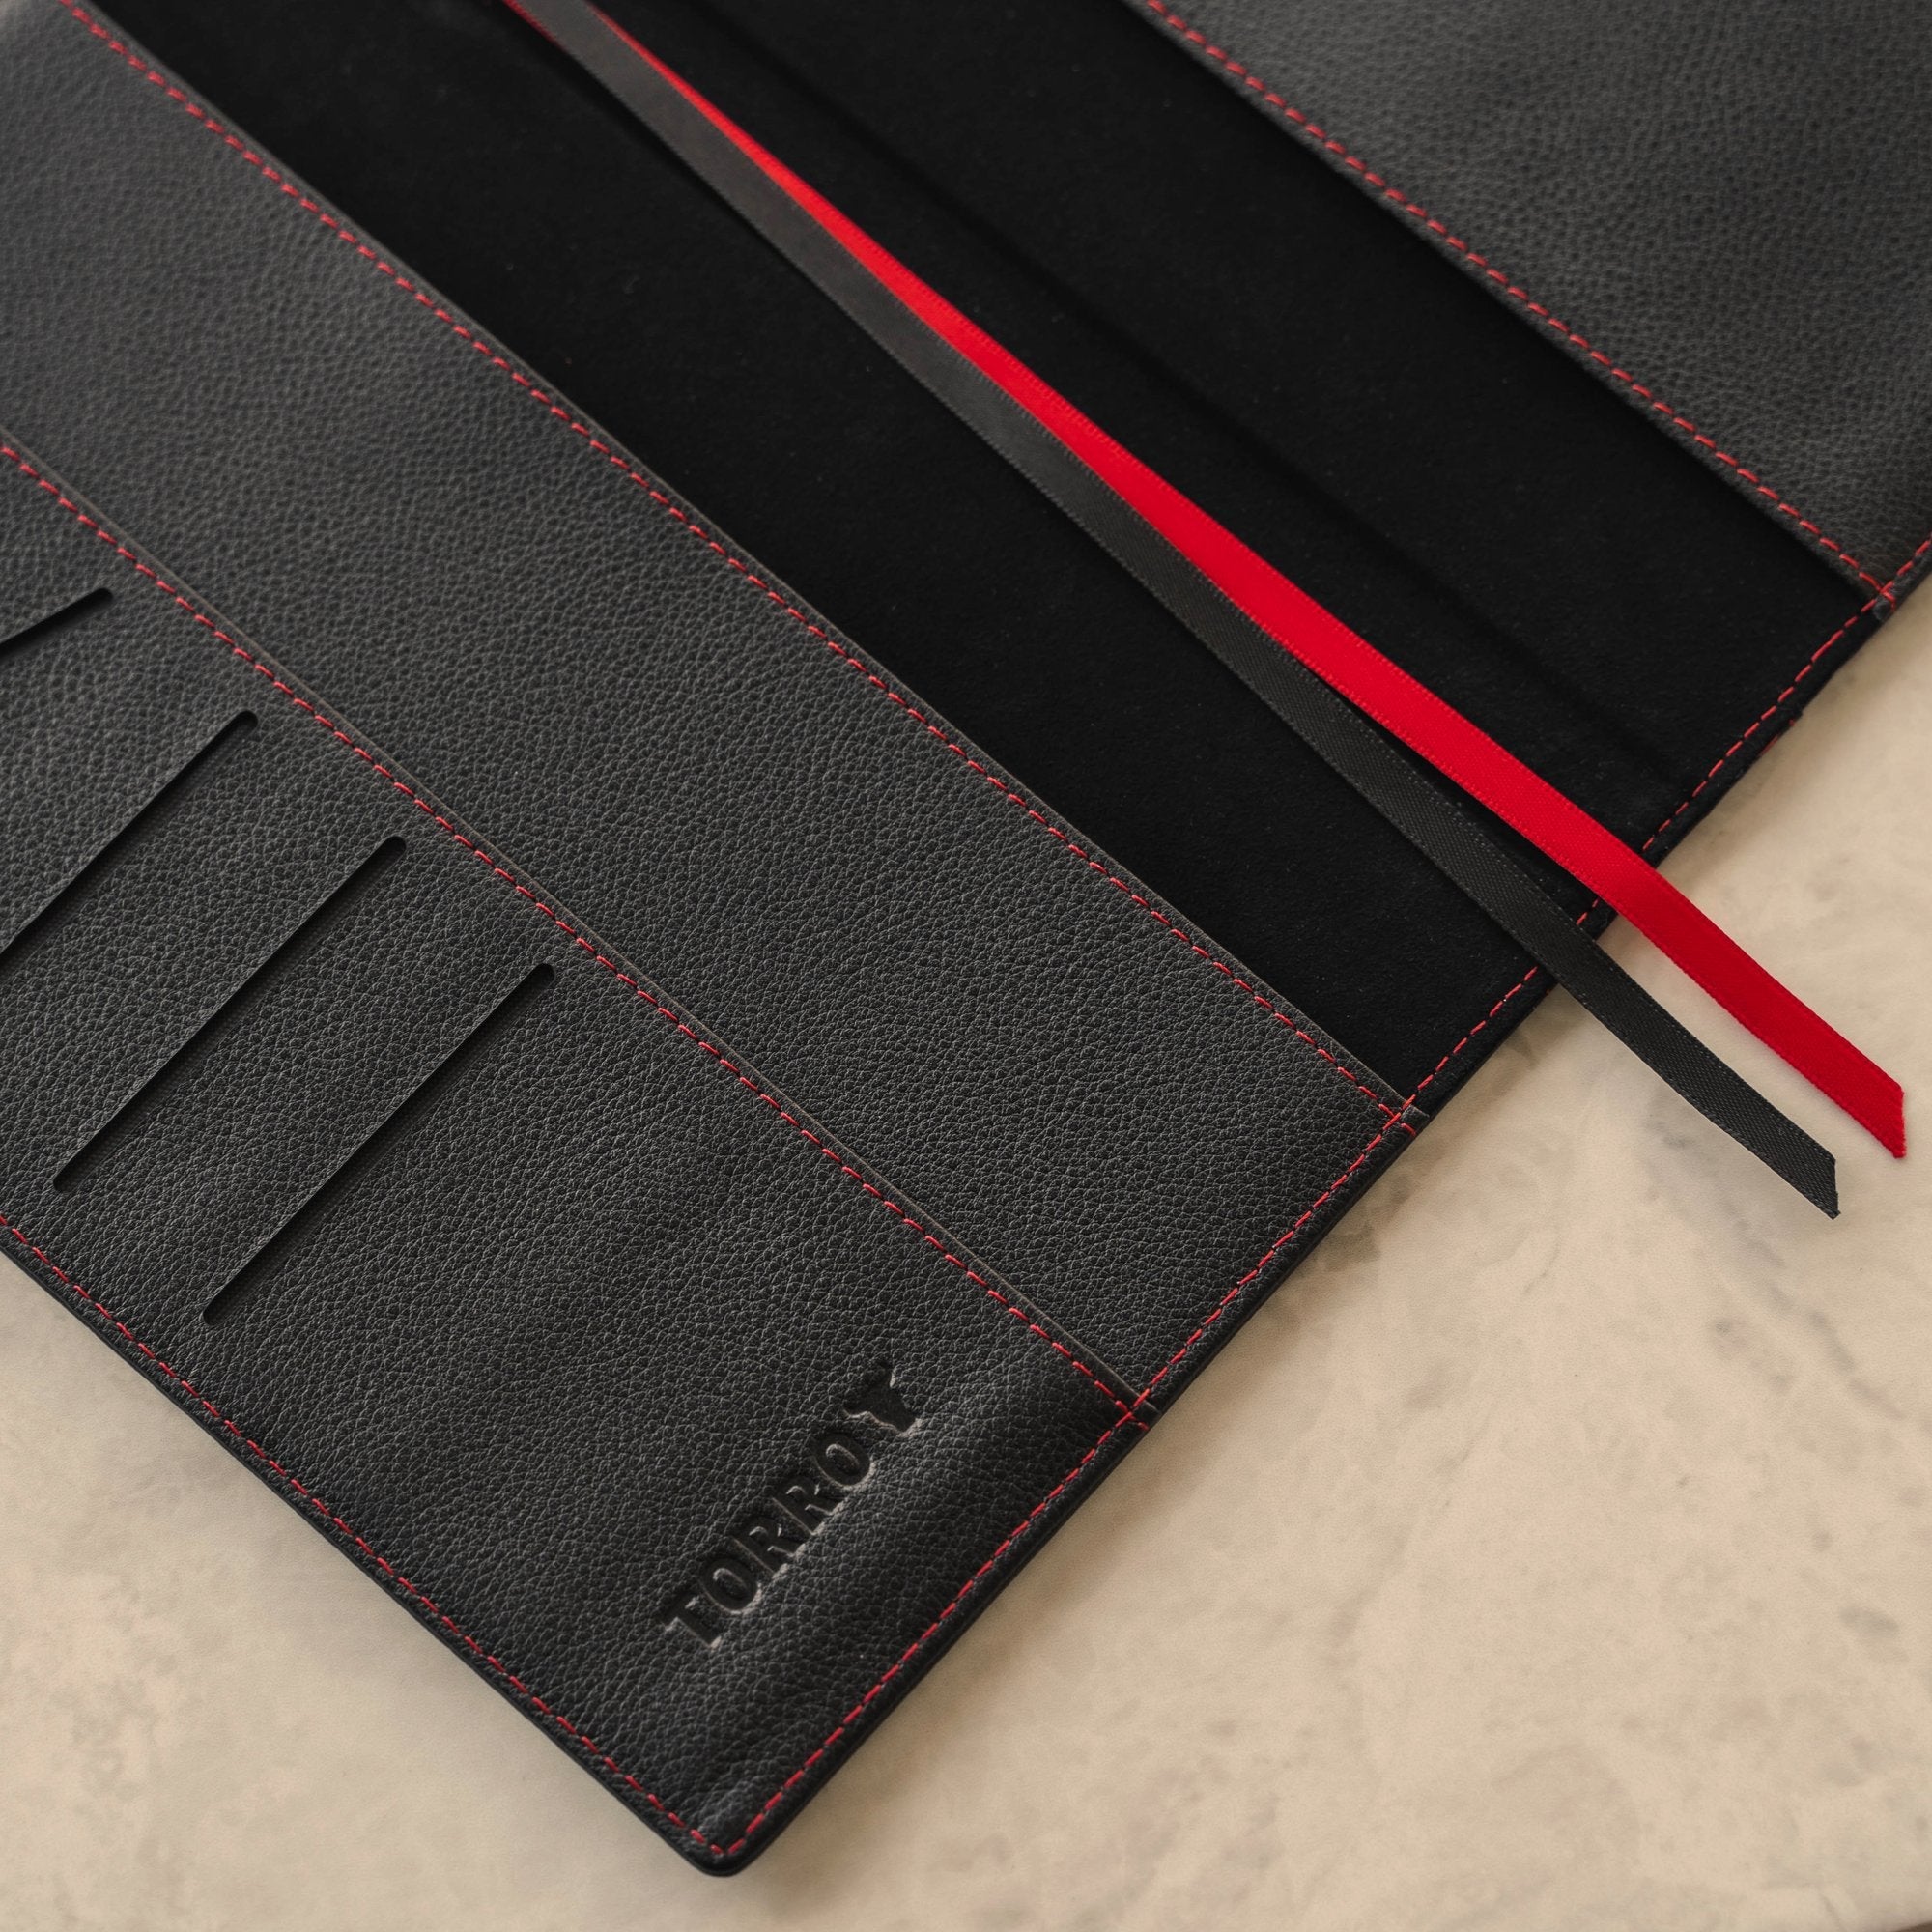 A4 / A5 Leather Notebook Cover (with Notebook Insert)